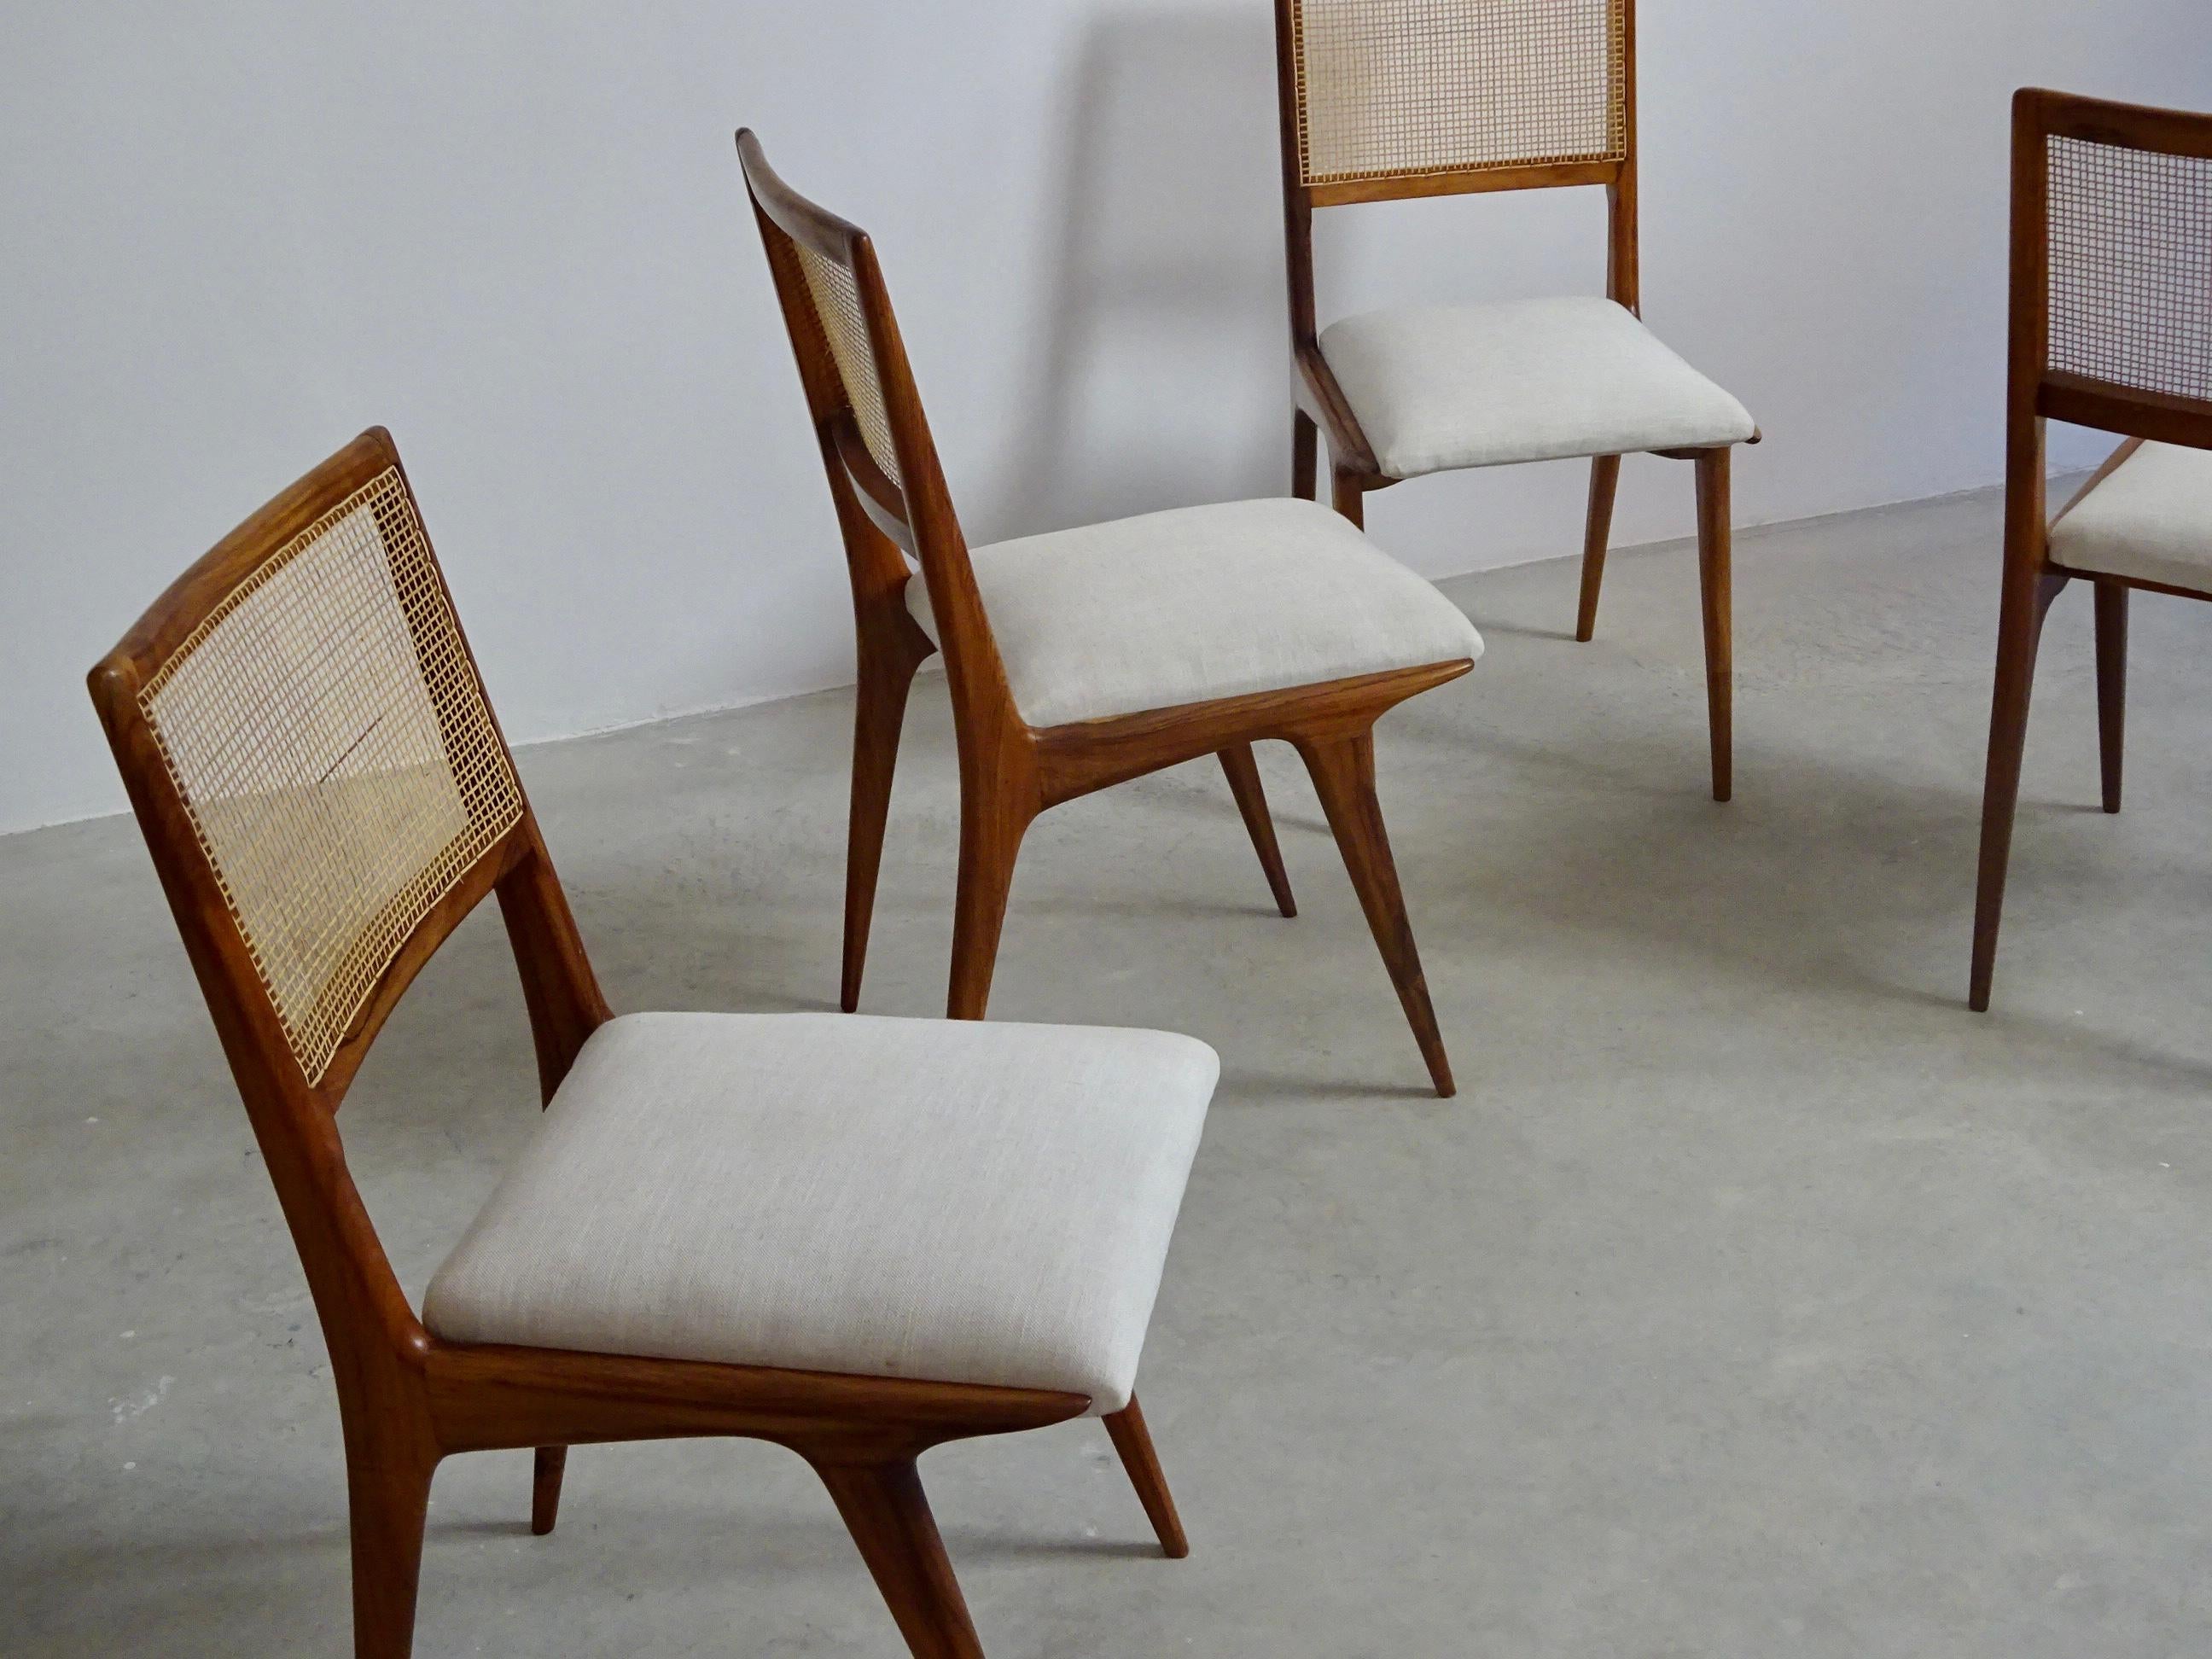 Set of four chairs in “caviúna” wood, cane and upholstery, unknown designer, produced by “Hall. Móveis e Decorações”, São Paulo, Brazil.